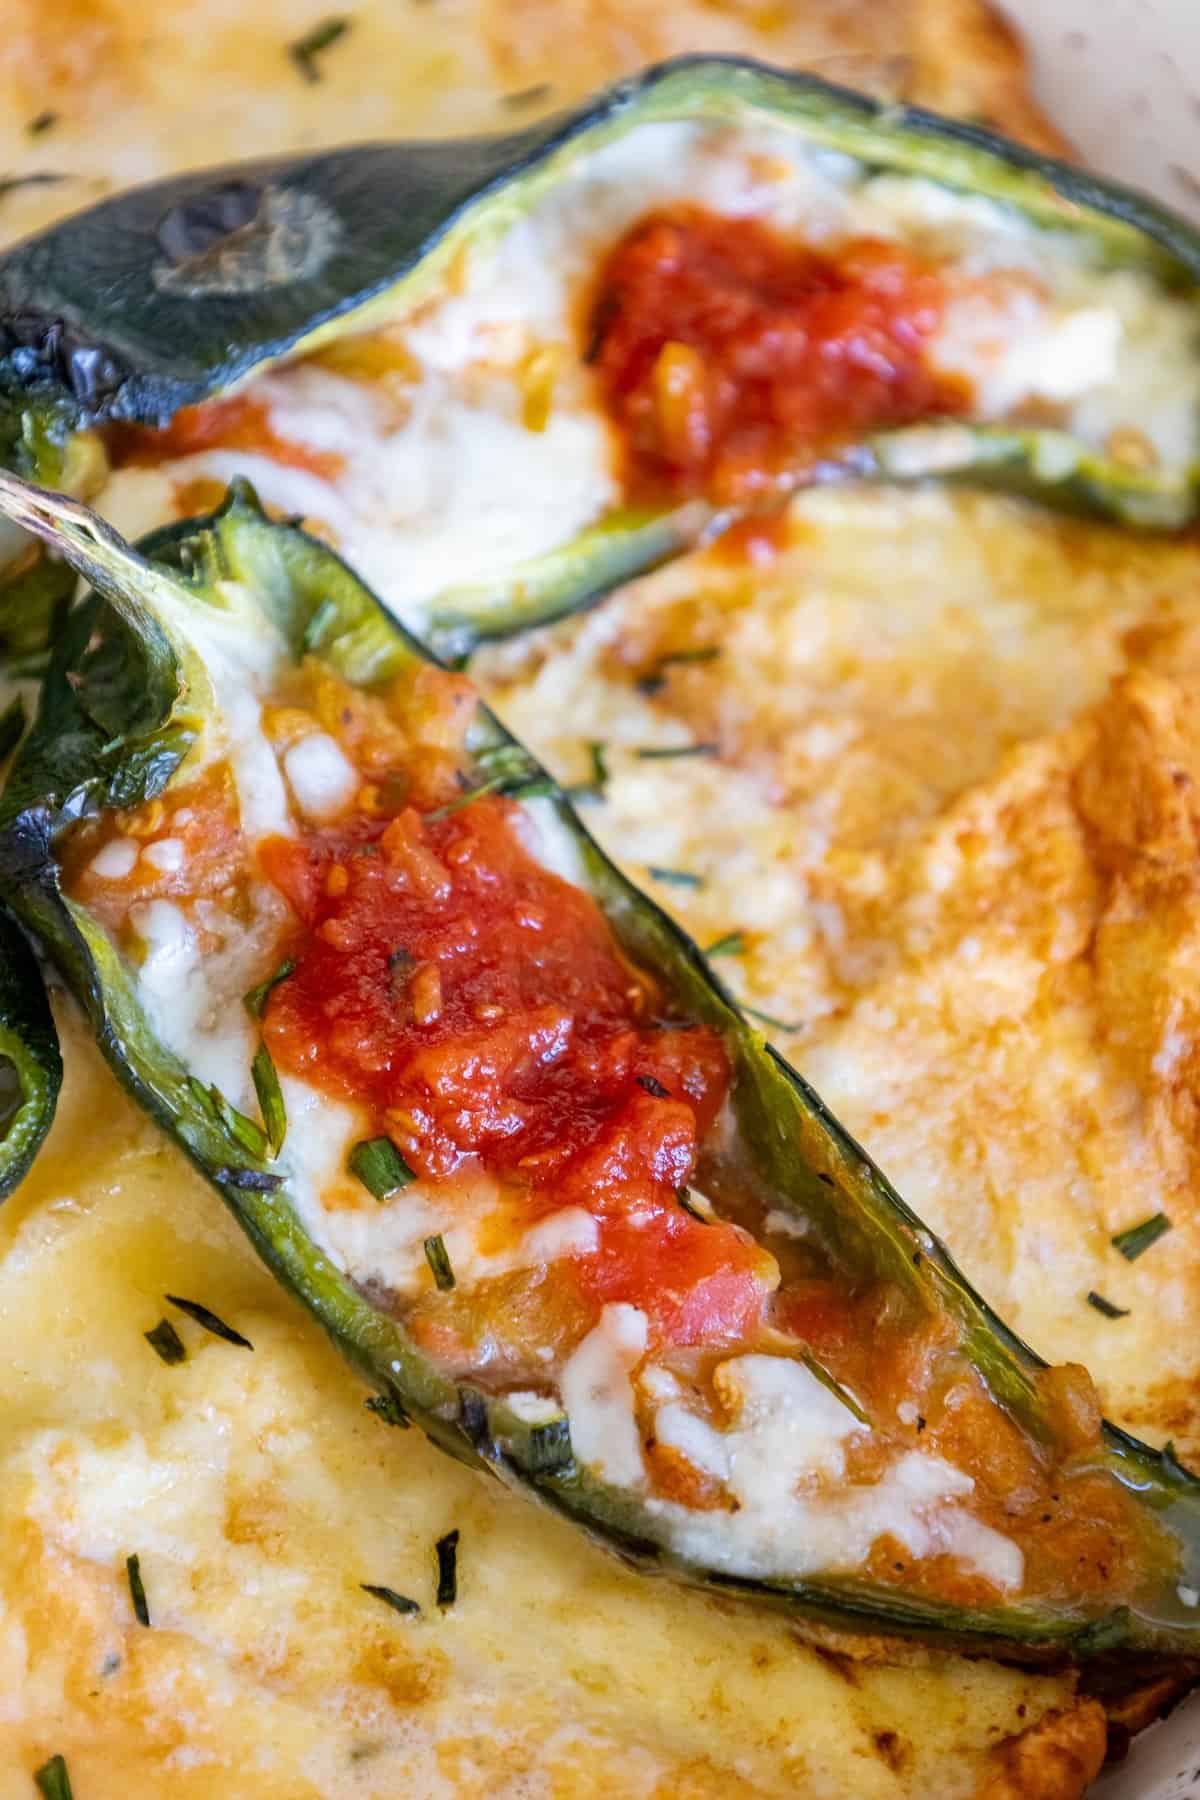 A skillet of stuffed jalapenos with cheese and sauce, similar to Chile Rellenos.